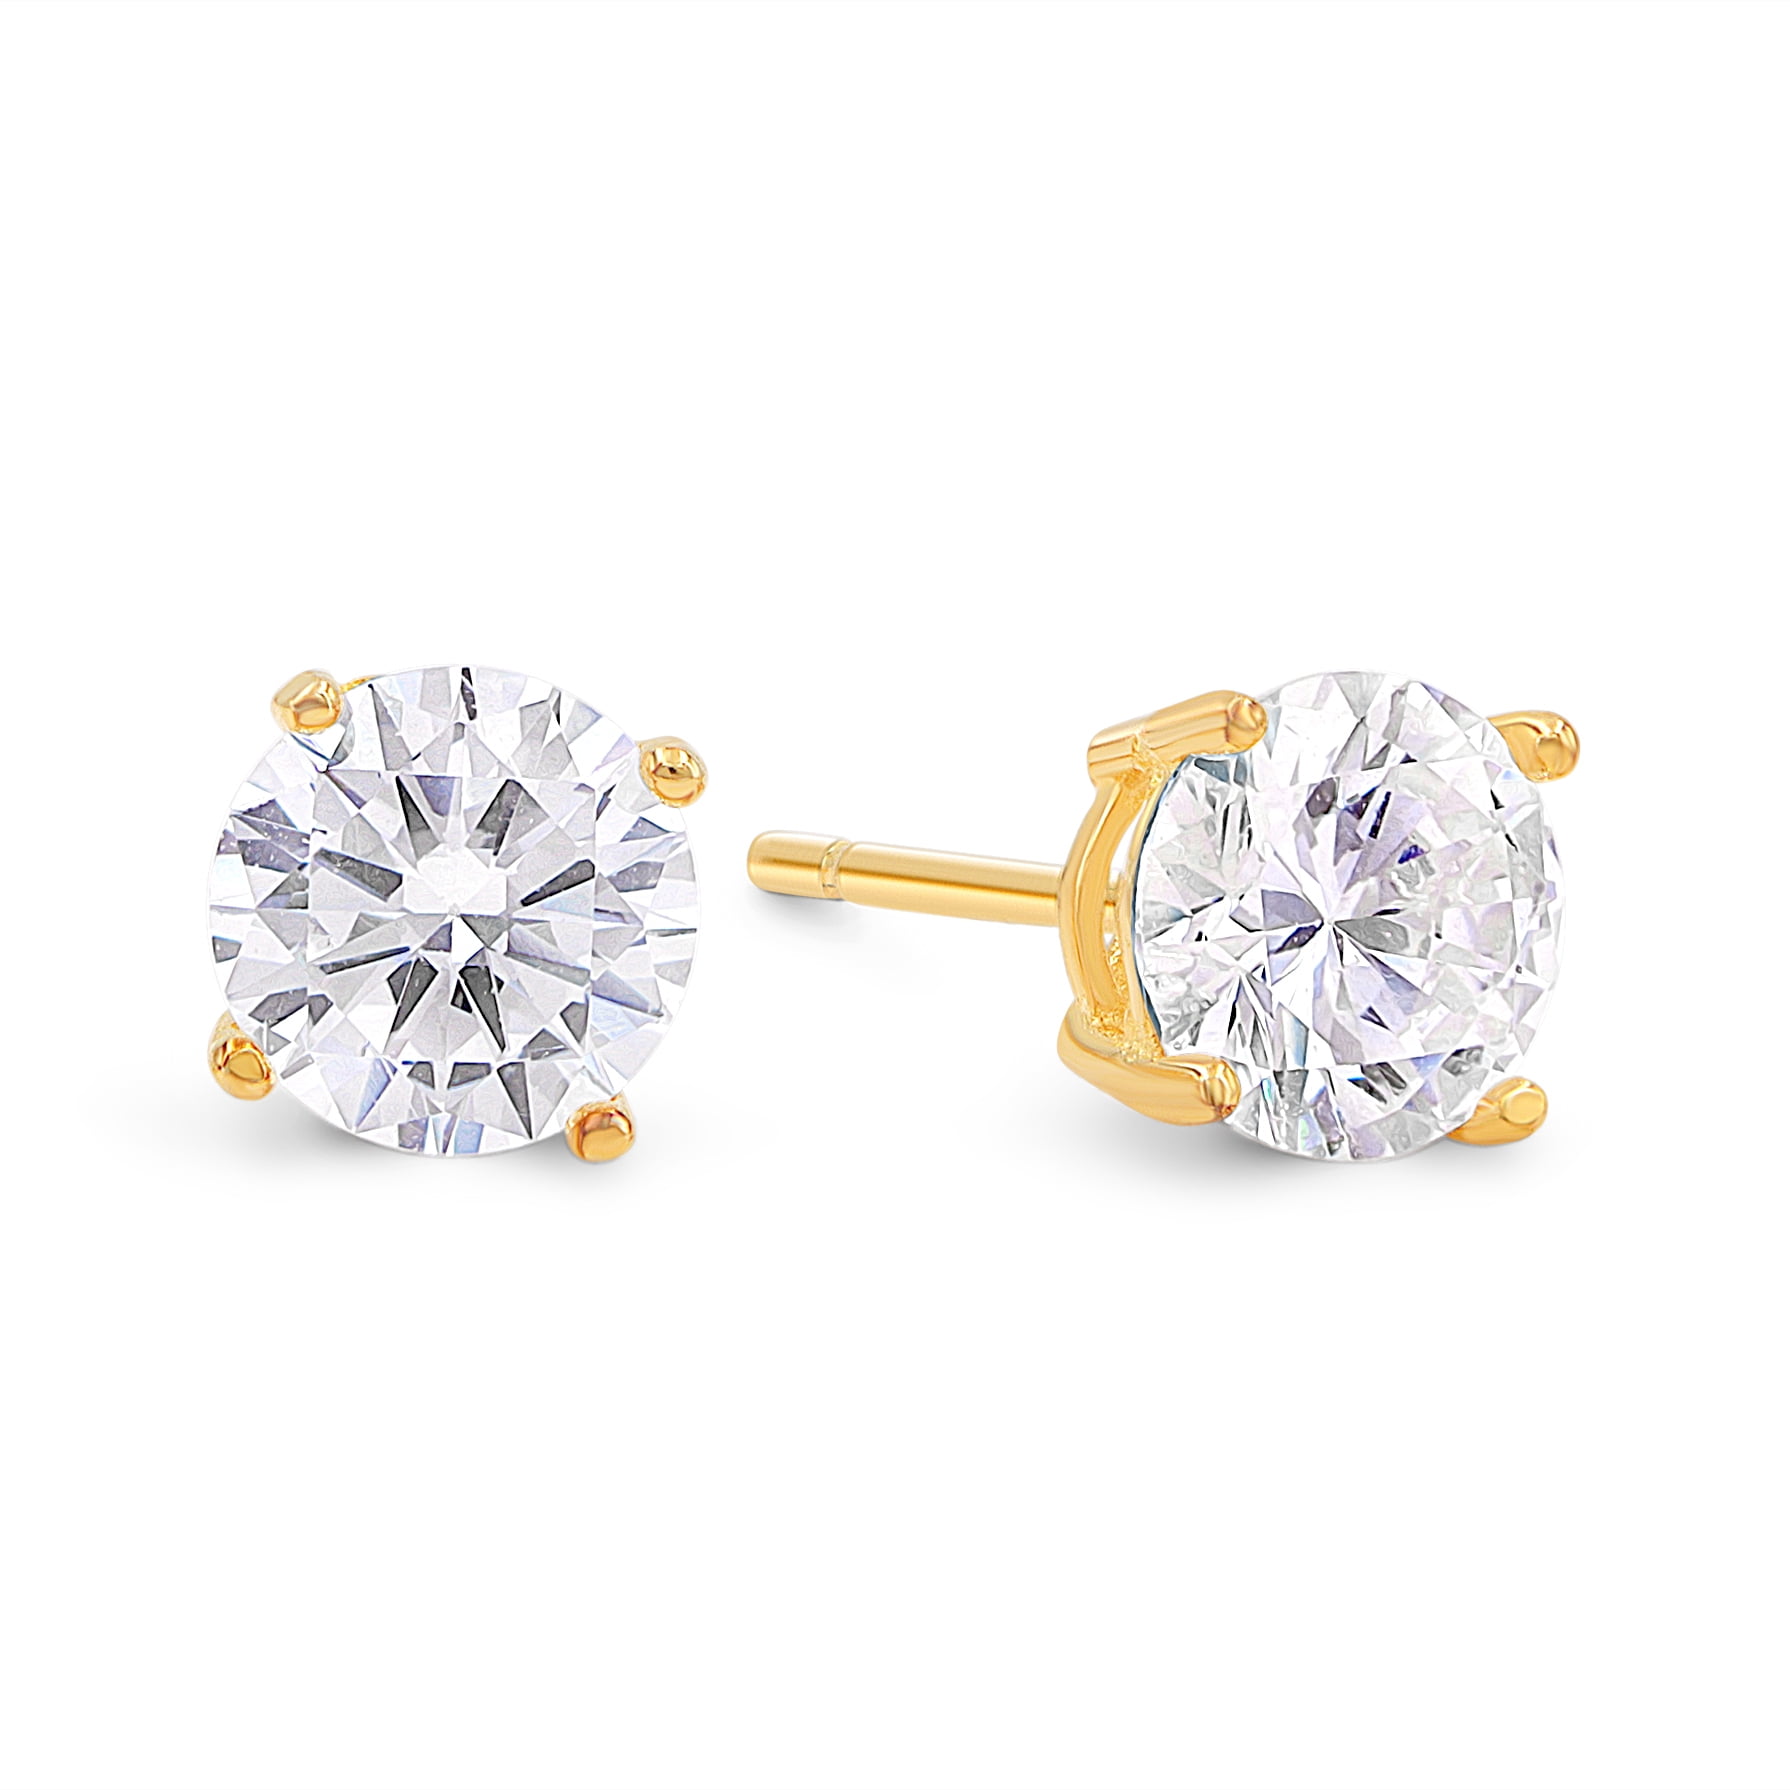 Gold Plated .925 Sterling Silver Basket Setting Stud Earrings